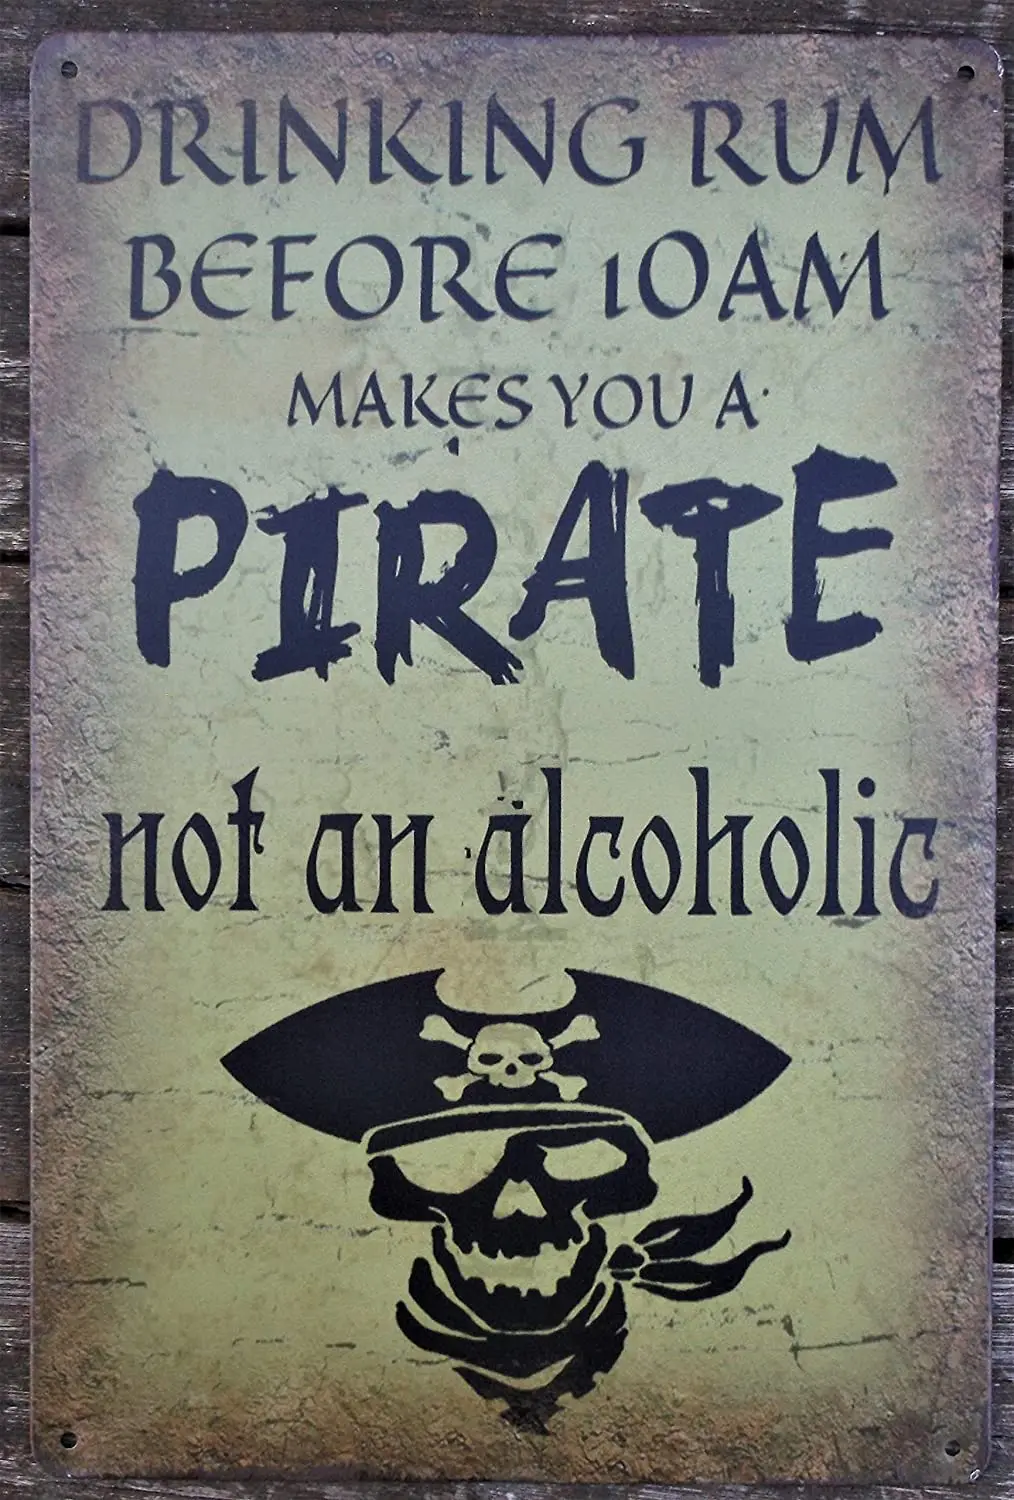 

Pirate Retro Metal Tin Sign Plaque Poster Wall Decor Art Shabby Chic Gift Suitable 12x8 Inch